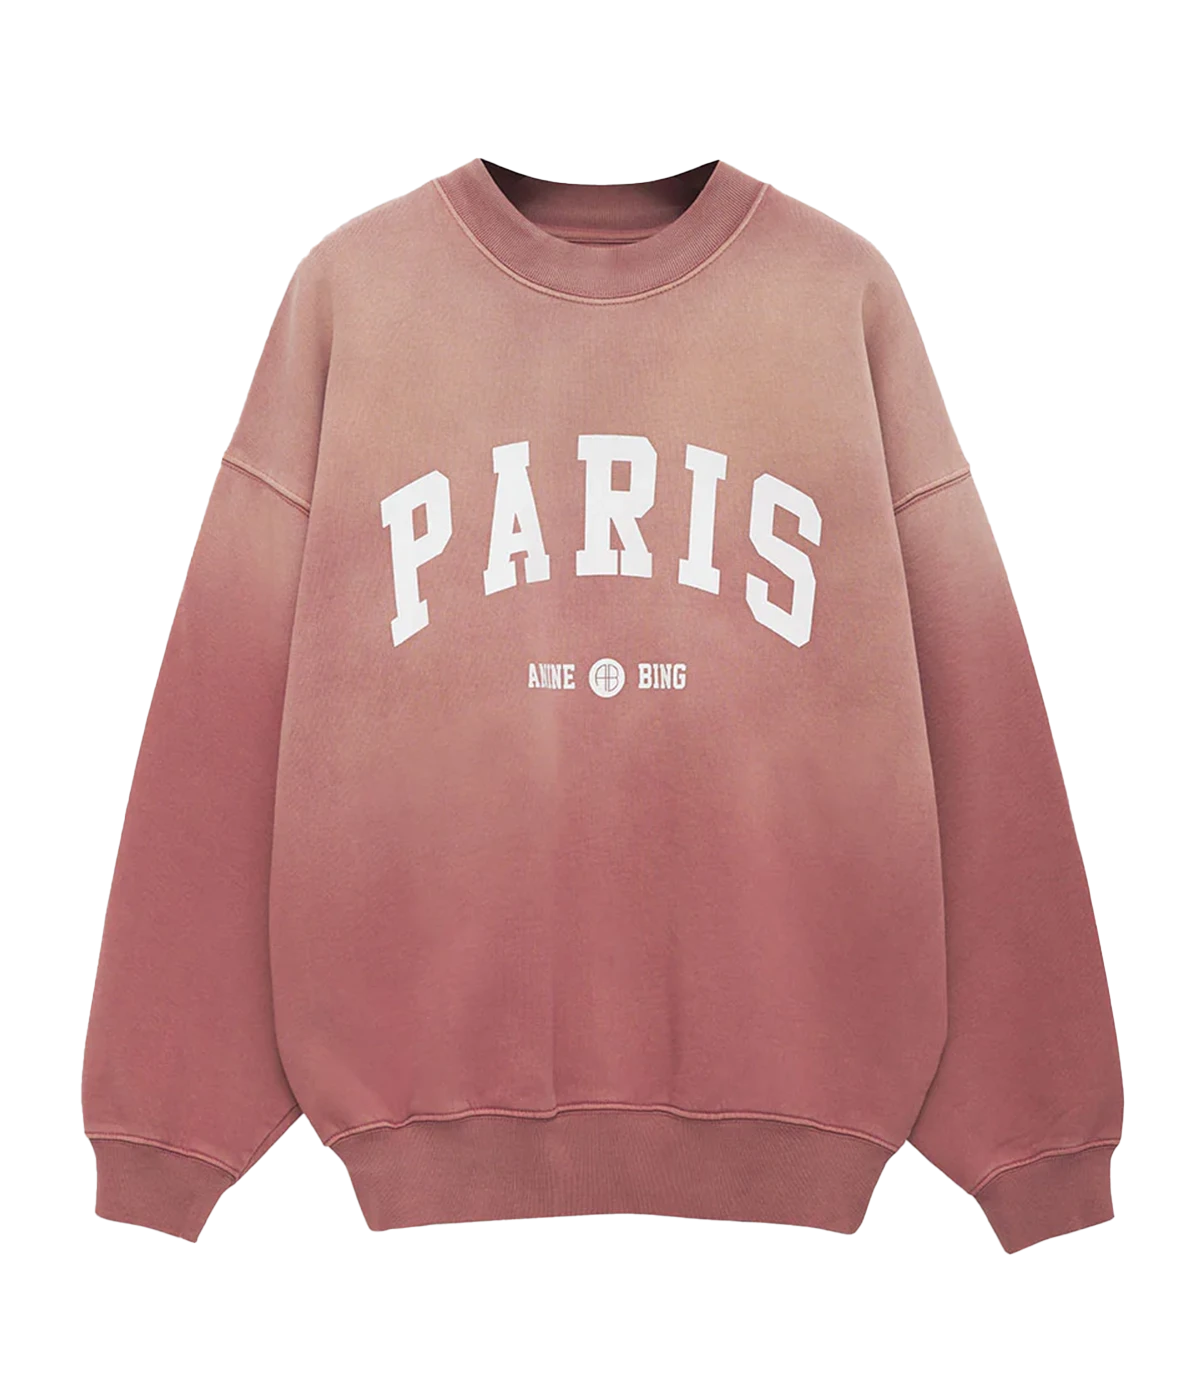  A trendy oversized crewneck pullover sweater, made from 100% cotton in a sun faded terracotta wash. A university inspired jersey design with collegiate lettering PARIS. Comfy cosy, trendy, comfortable, everyday wear, winter staple, throw on and go, made in Los Angeles. 